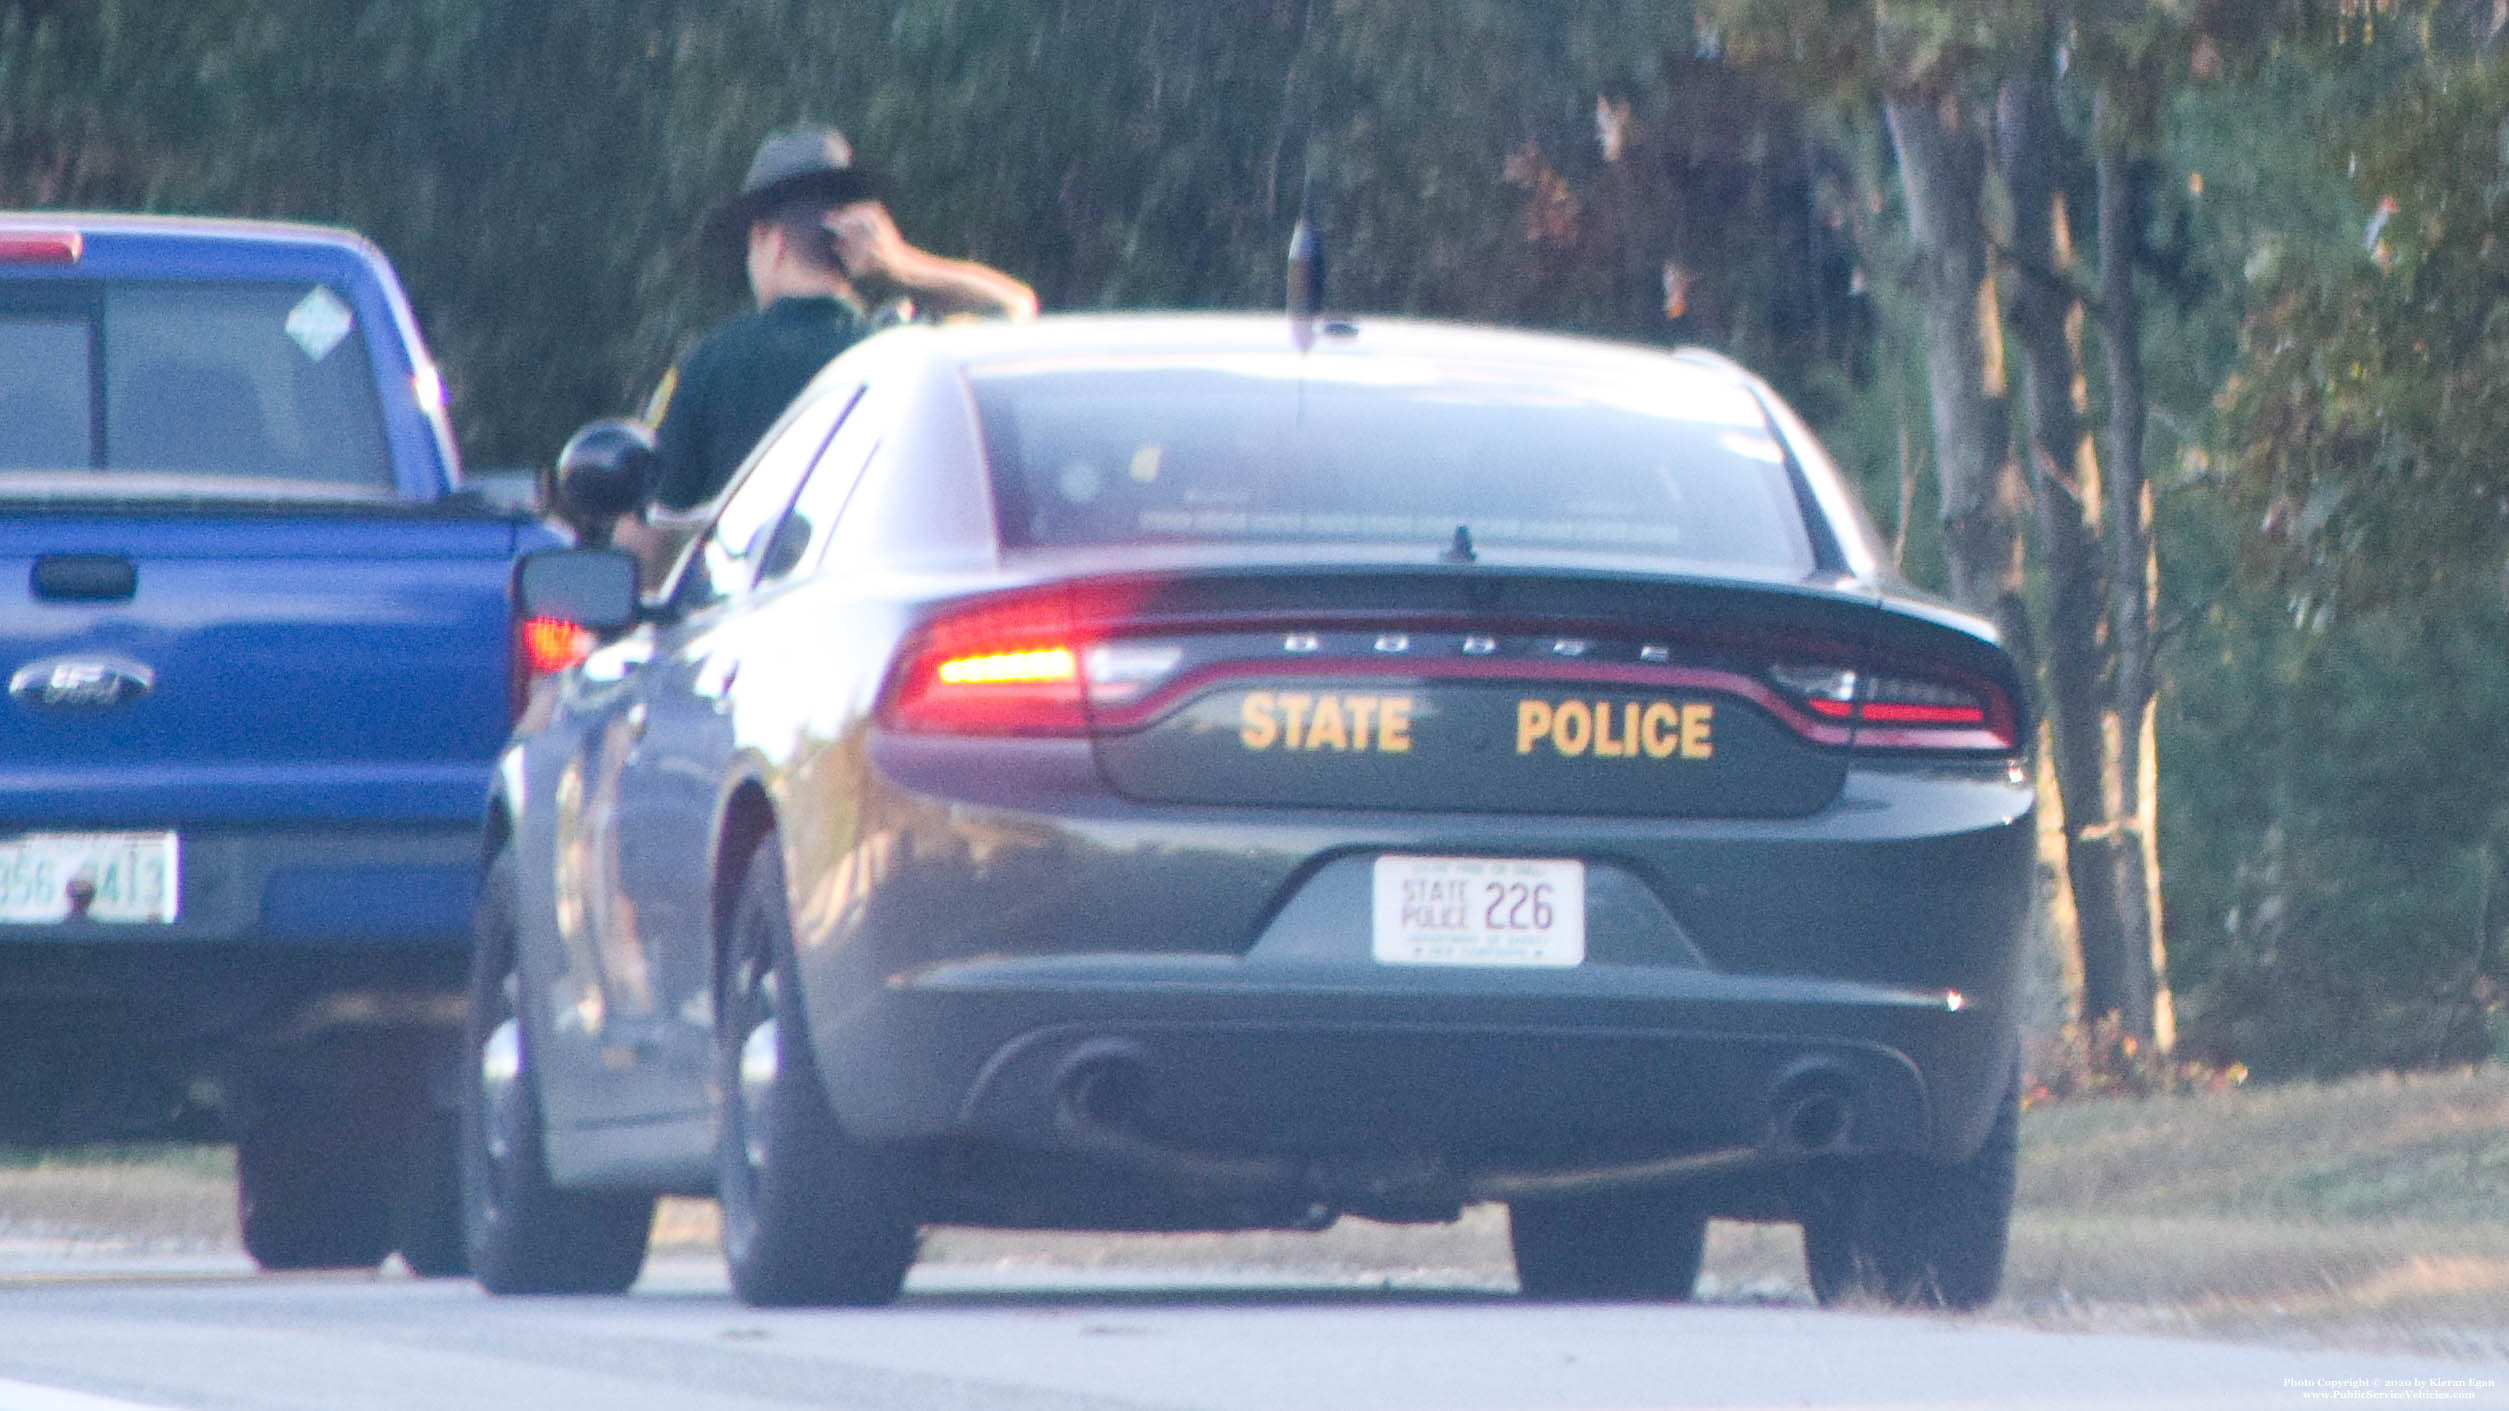 A photo  of New Hampshire State Police
            Cruiser 226, a 2015-2019 Dodge Charger             taken by Kieran Egan